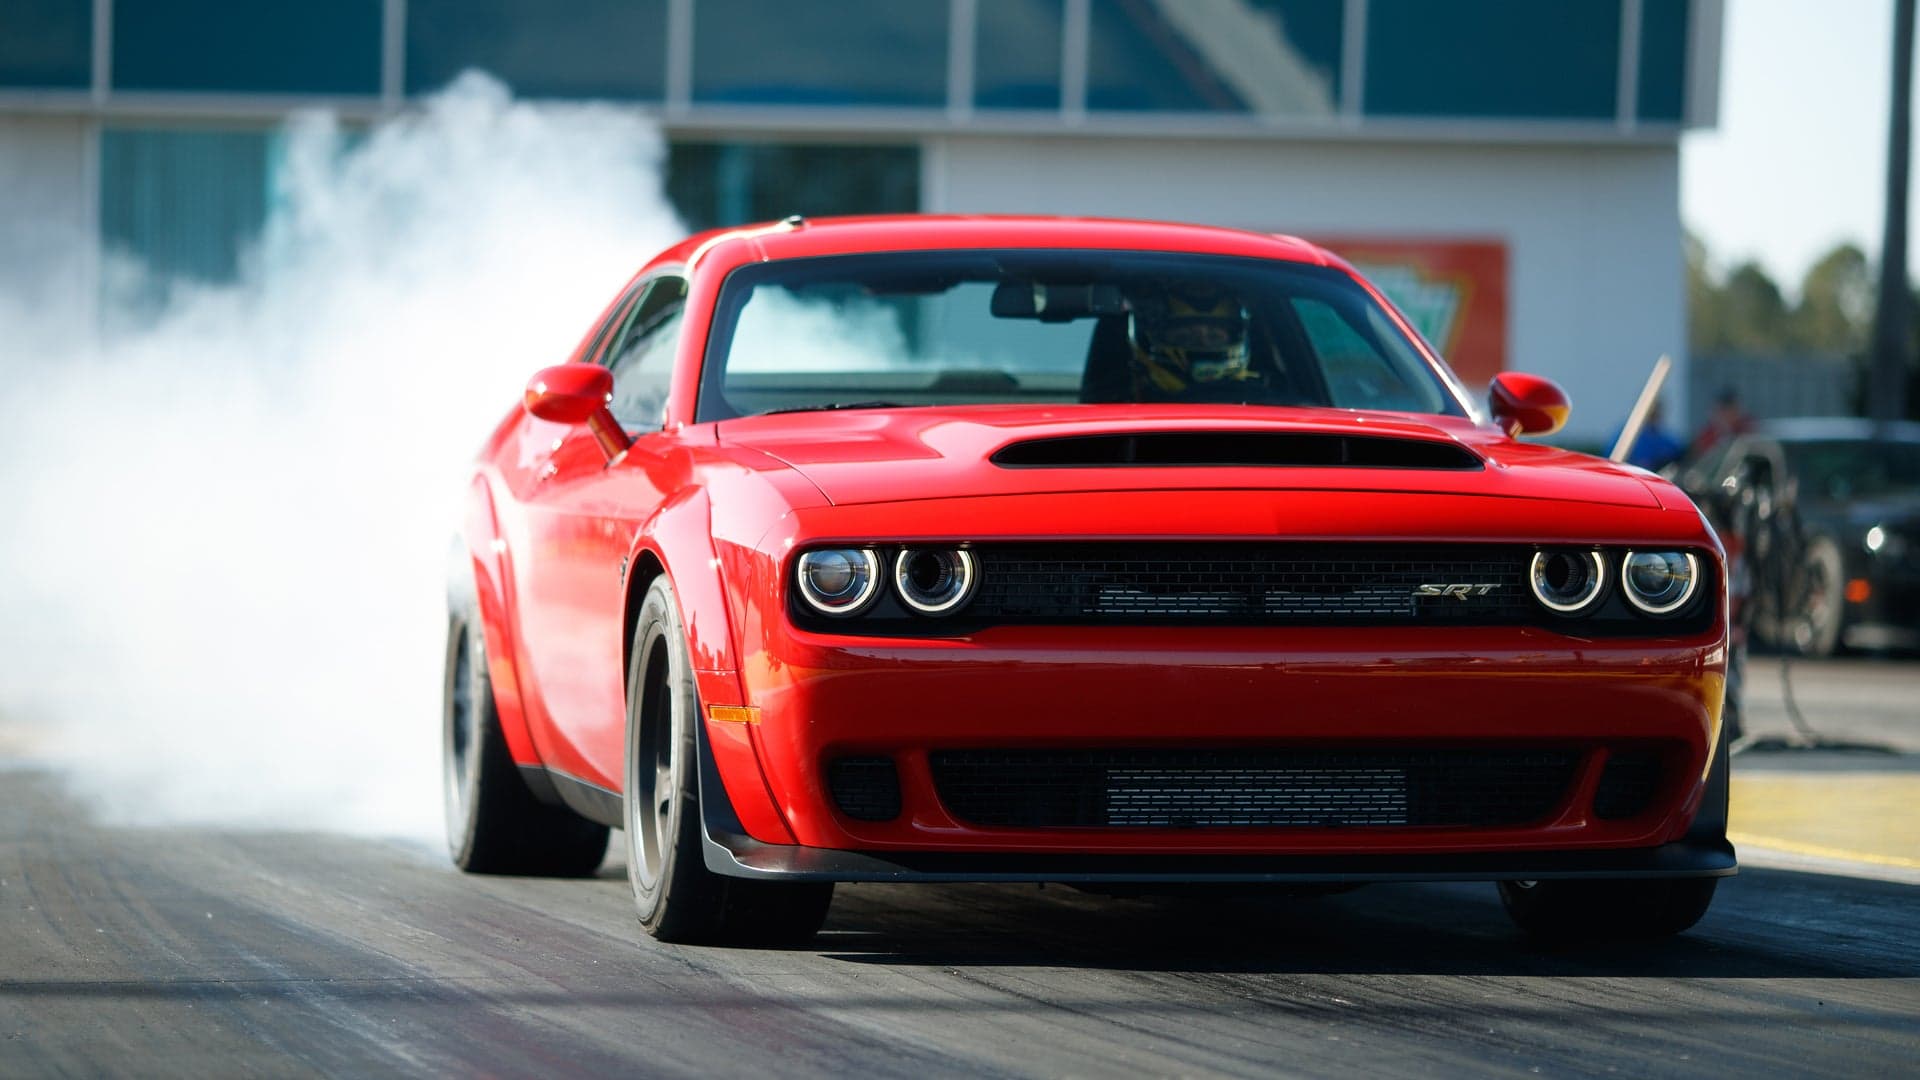 Dodge Dealers Taking Early Demon Deposits Without Corporate Approval